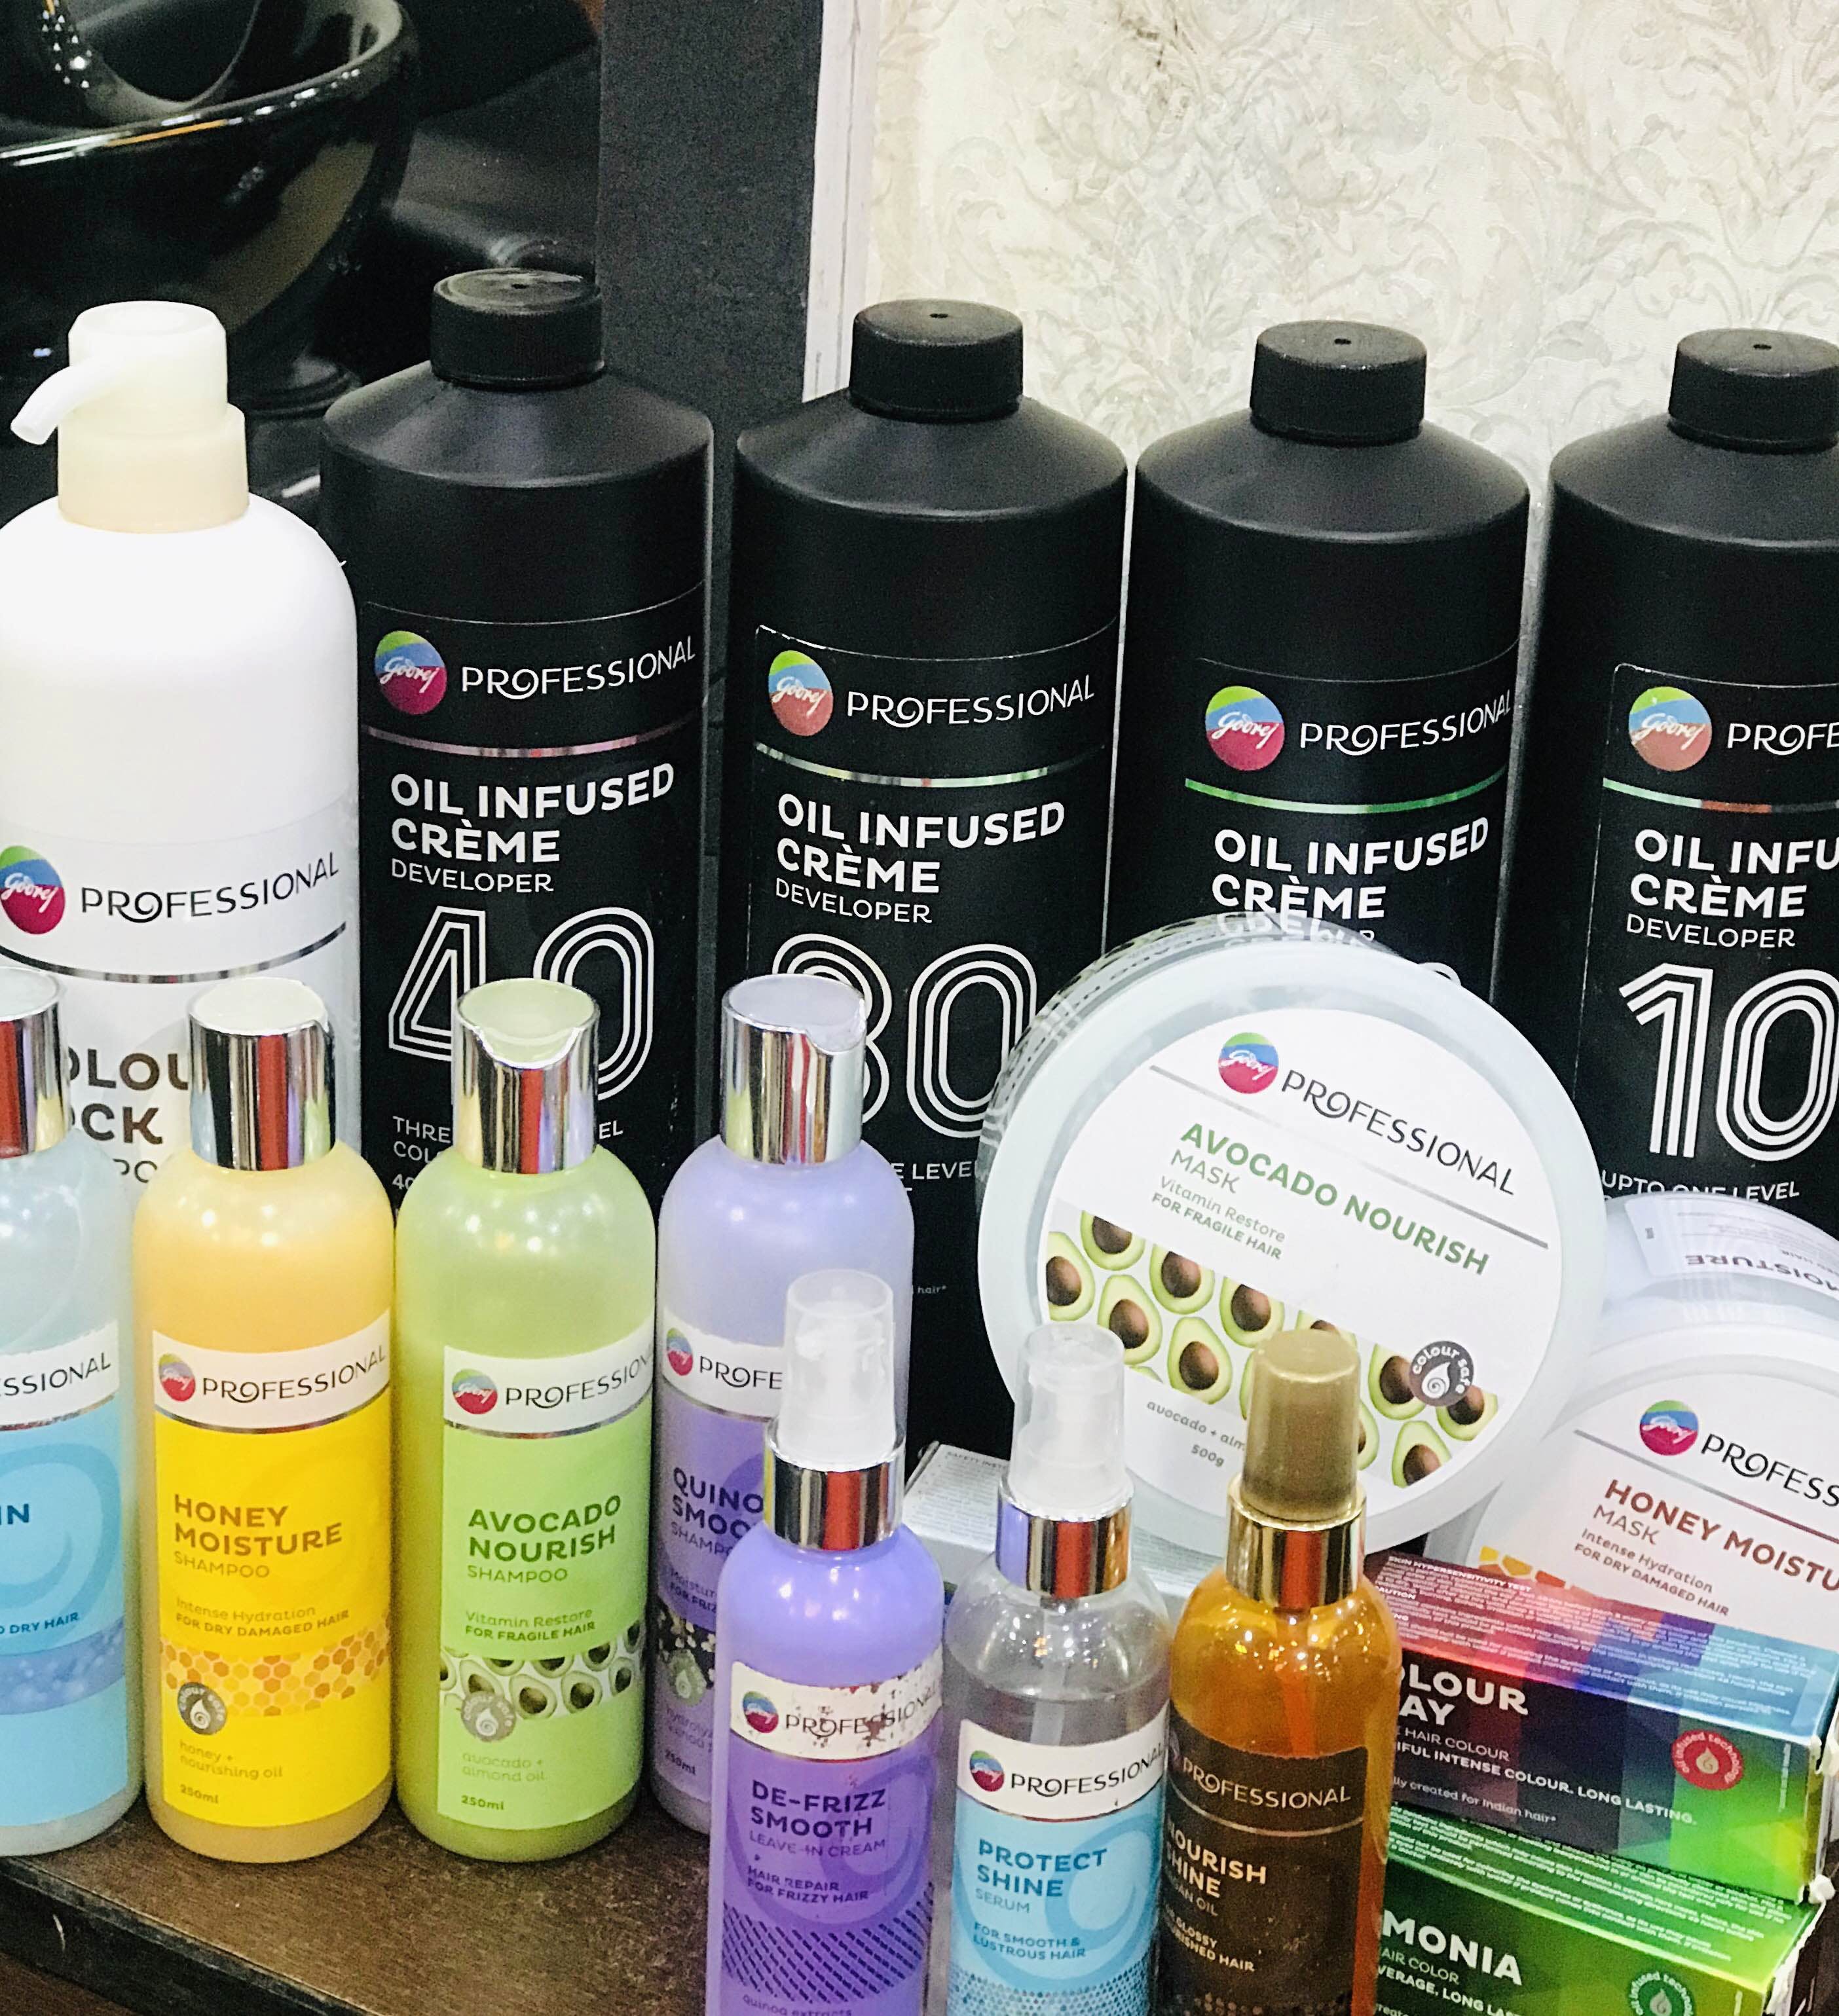 Godrej Professional Launches Hair Styling Products, Check Out Now! | LBB